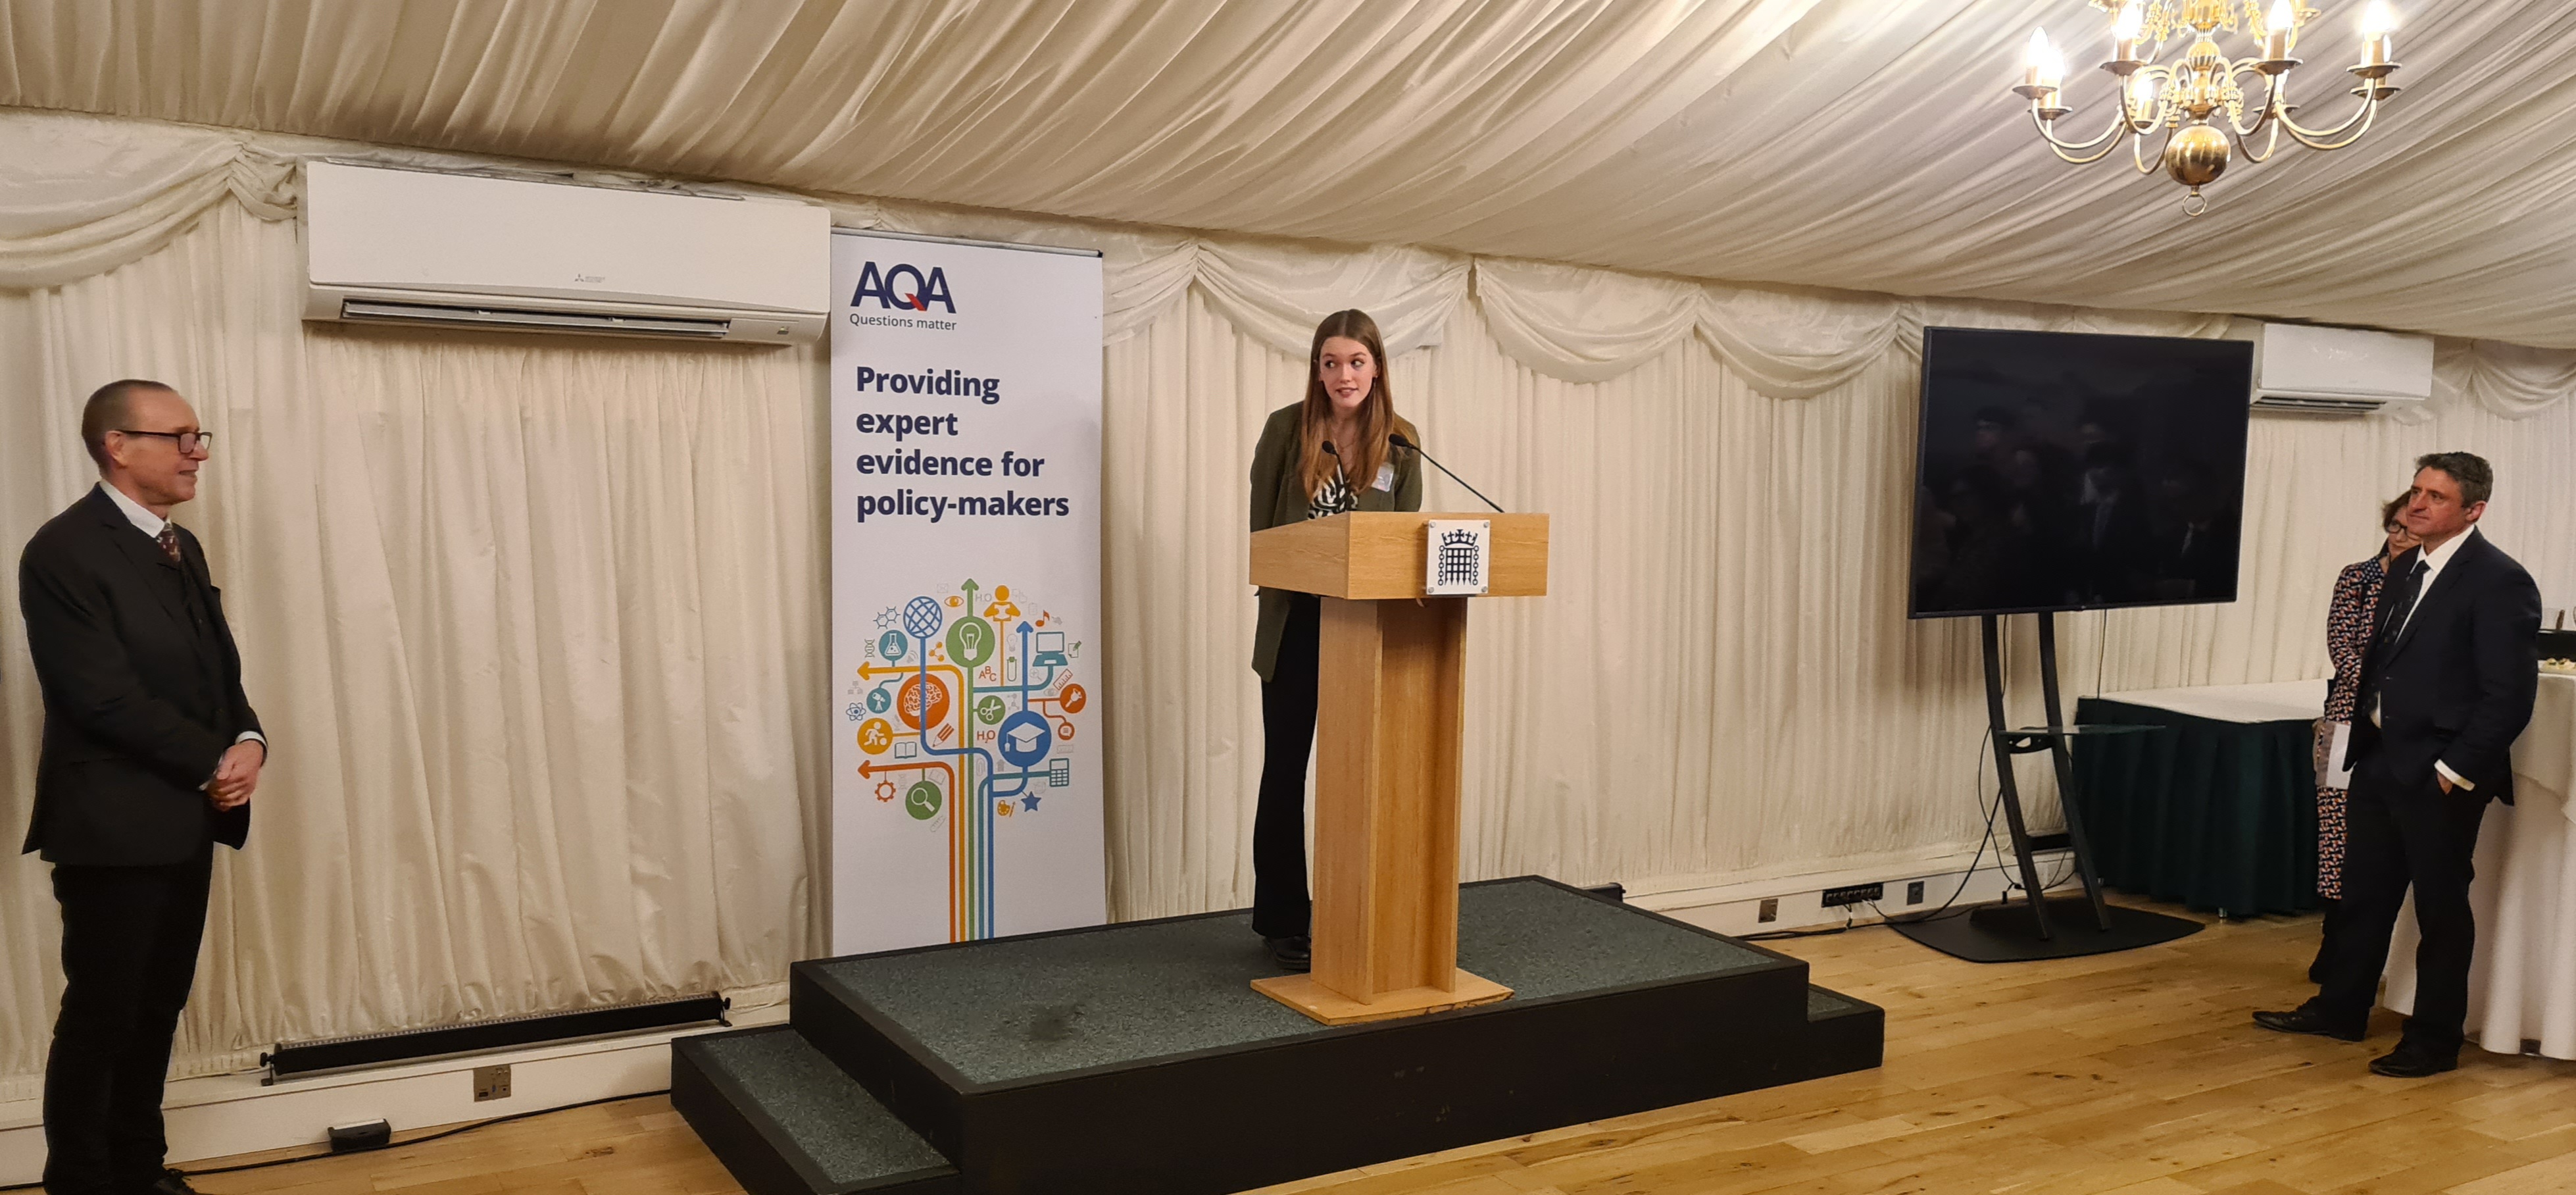 Cerys McGrath speaking with AQA CEO Colin Hughes (far left) and event sponsor, Ben Everitt MP(far right), listening intently.